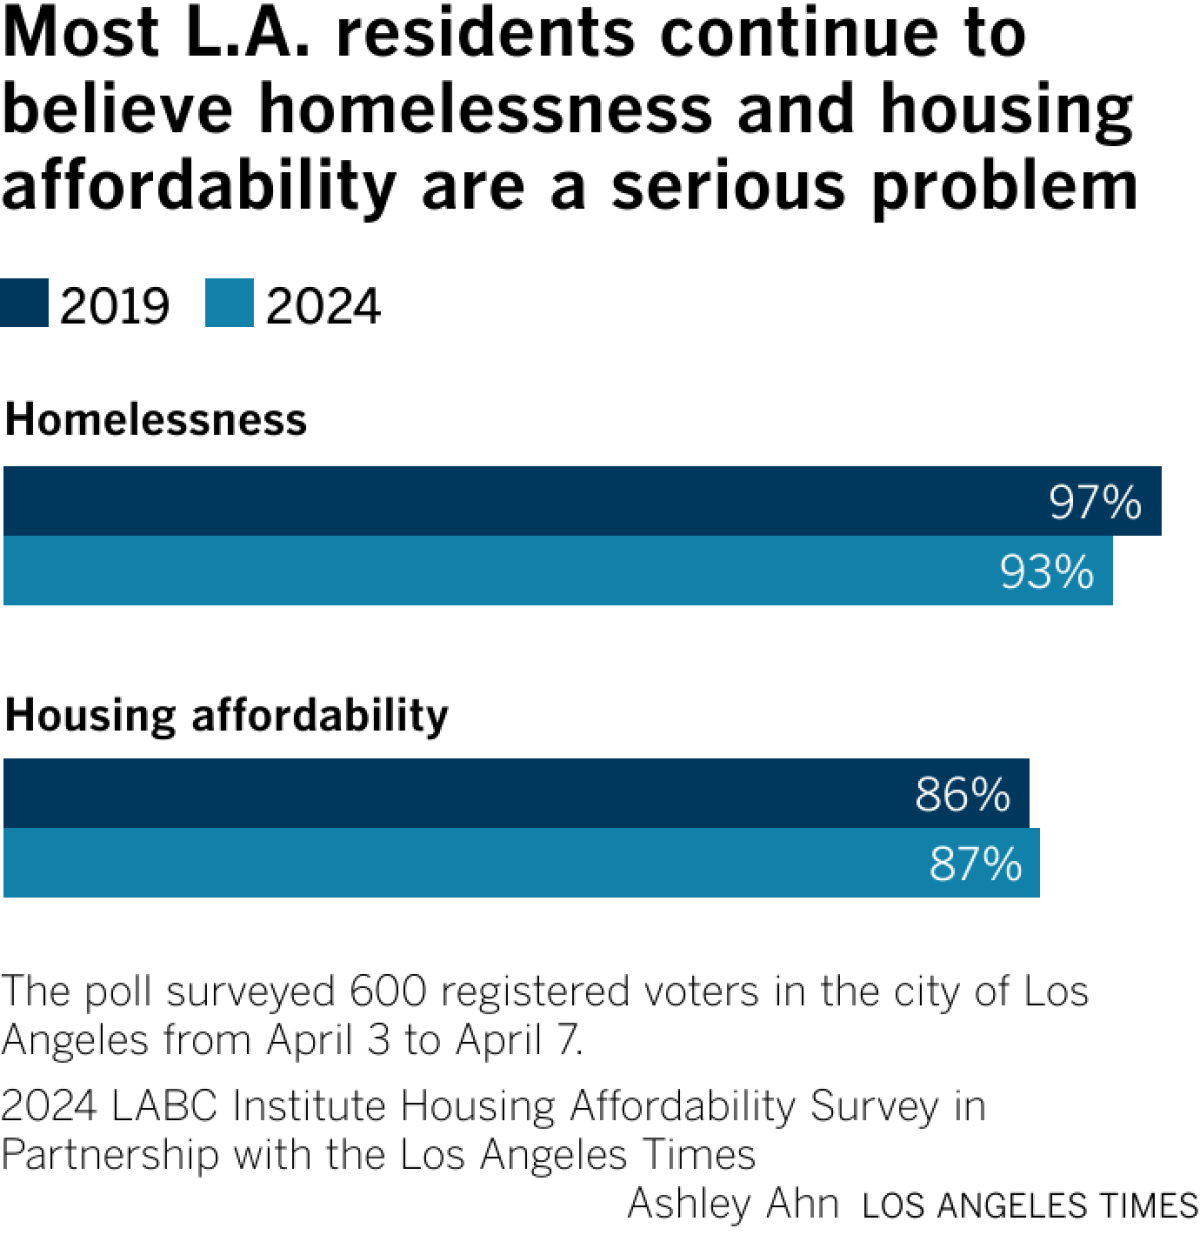 About 93% of L.A. residents believed homelessness is a serious problem, compared to 95% in 2019. About 85% of L.A. residents believed housing affordability is a serious problem, compared to 87% in 2019.